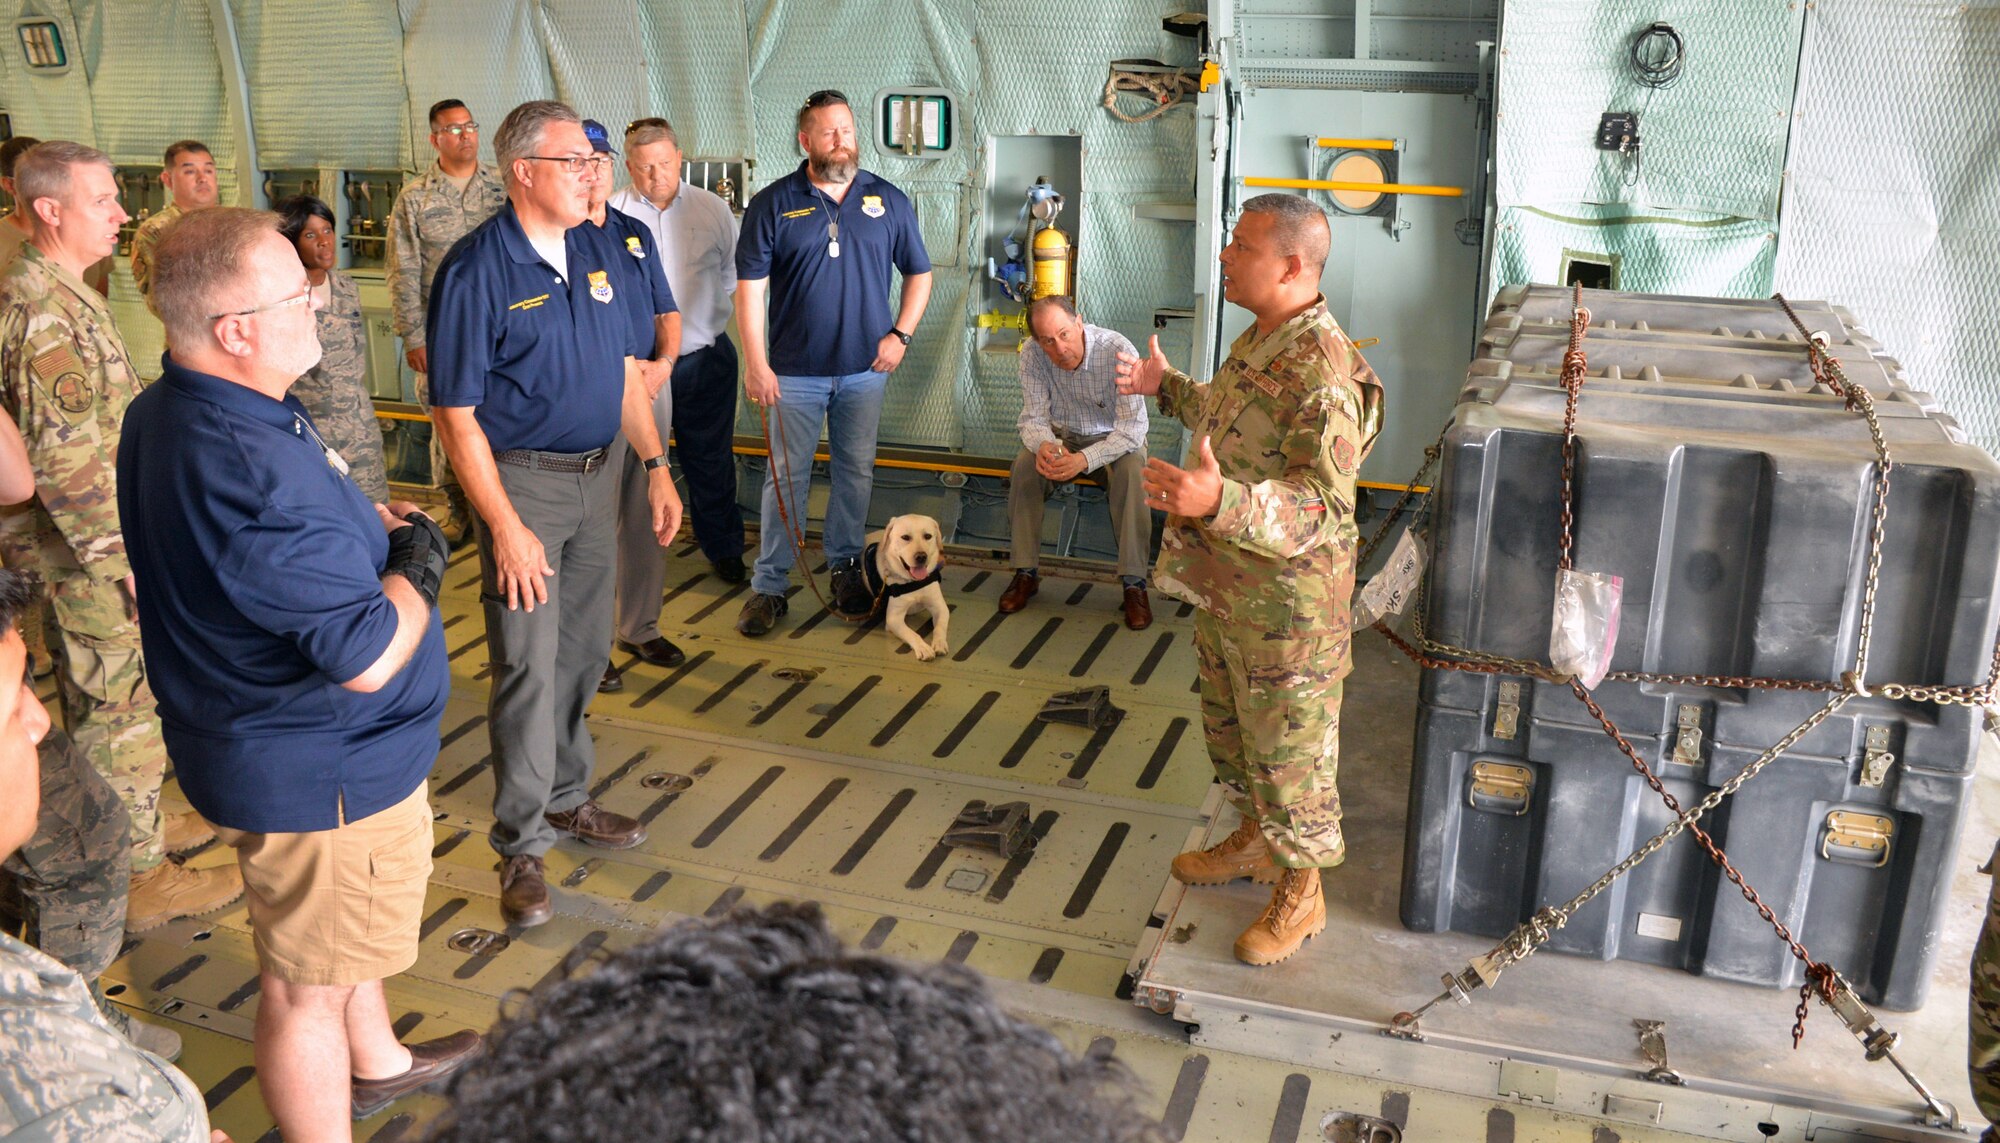 Chief Master Sgt. Vishal M. Rose, 74th Aerial Port Squadron superintendent of operations, talks to the honorary commanders about how the military airlift system moves cargo and passengers during the 433rd Mission Support Group at Joint Base San Antonio-Lackland, Texas Sept. 7, 2019.